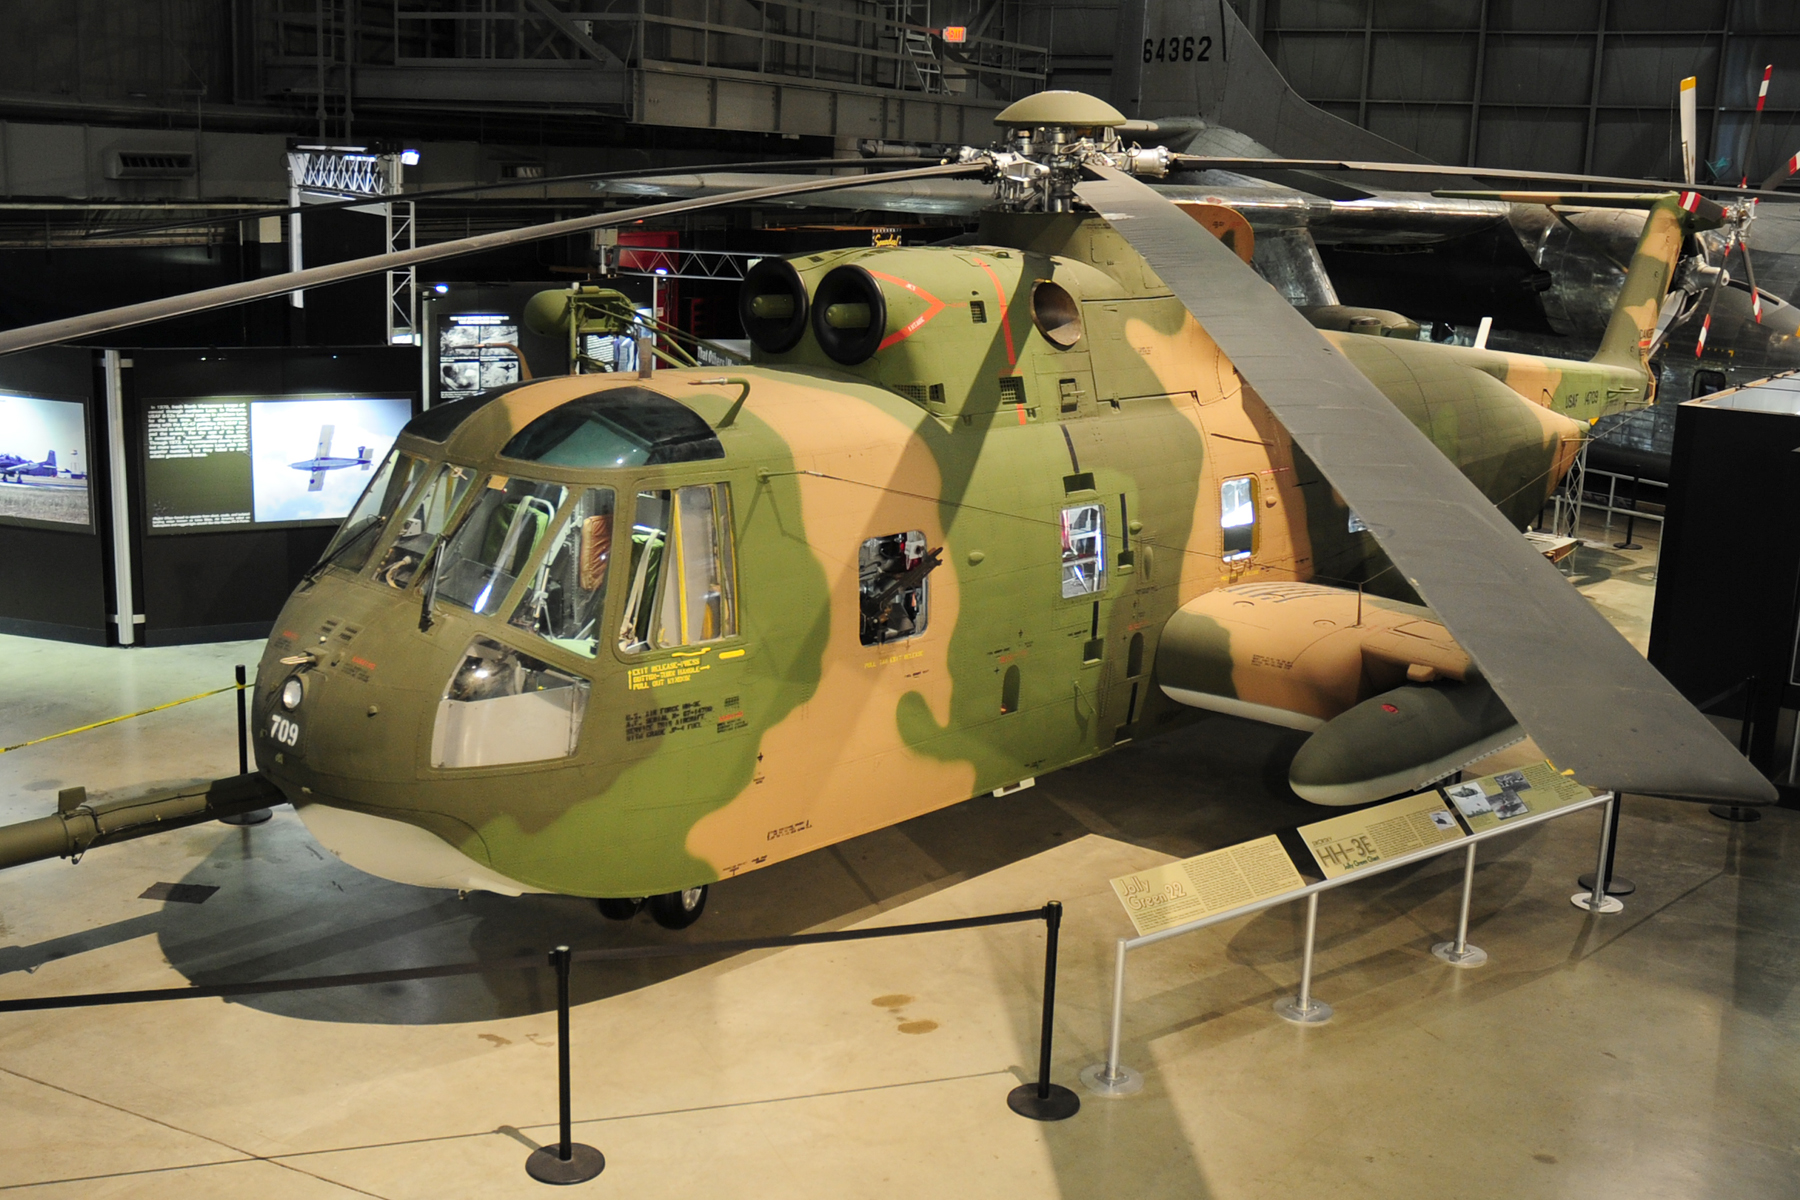 The restored Sikorsky HH-3E Jolly Green Giant, 67-14706, on display at the National Museum of the United States Air Force. (NMUSAF)